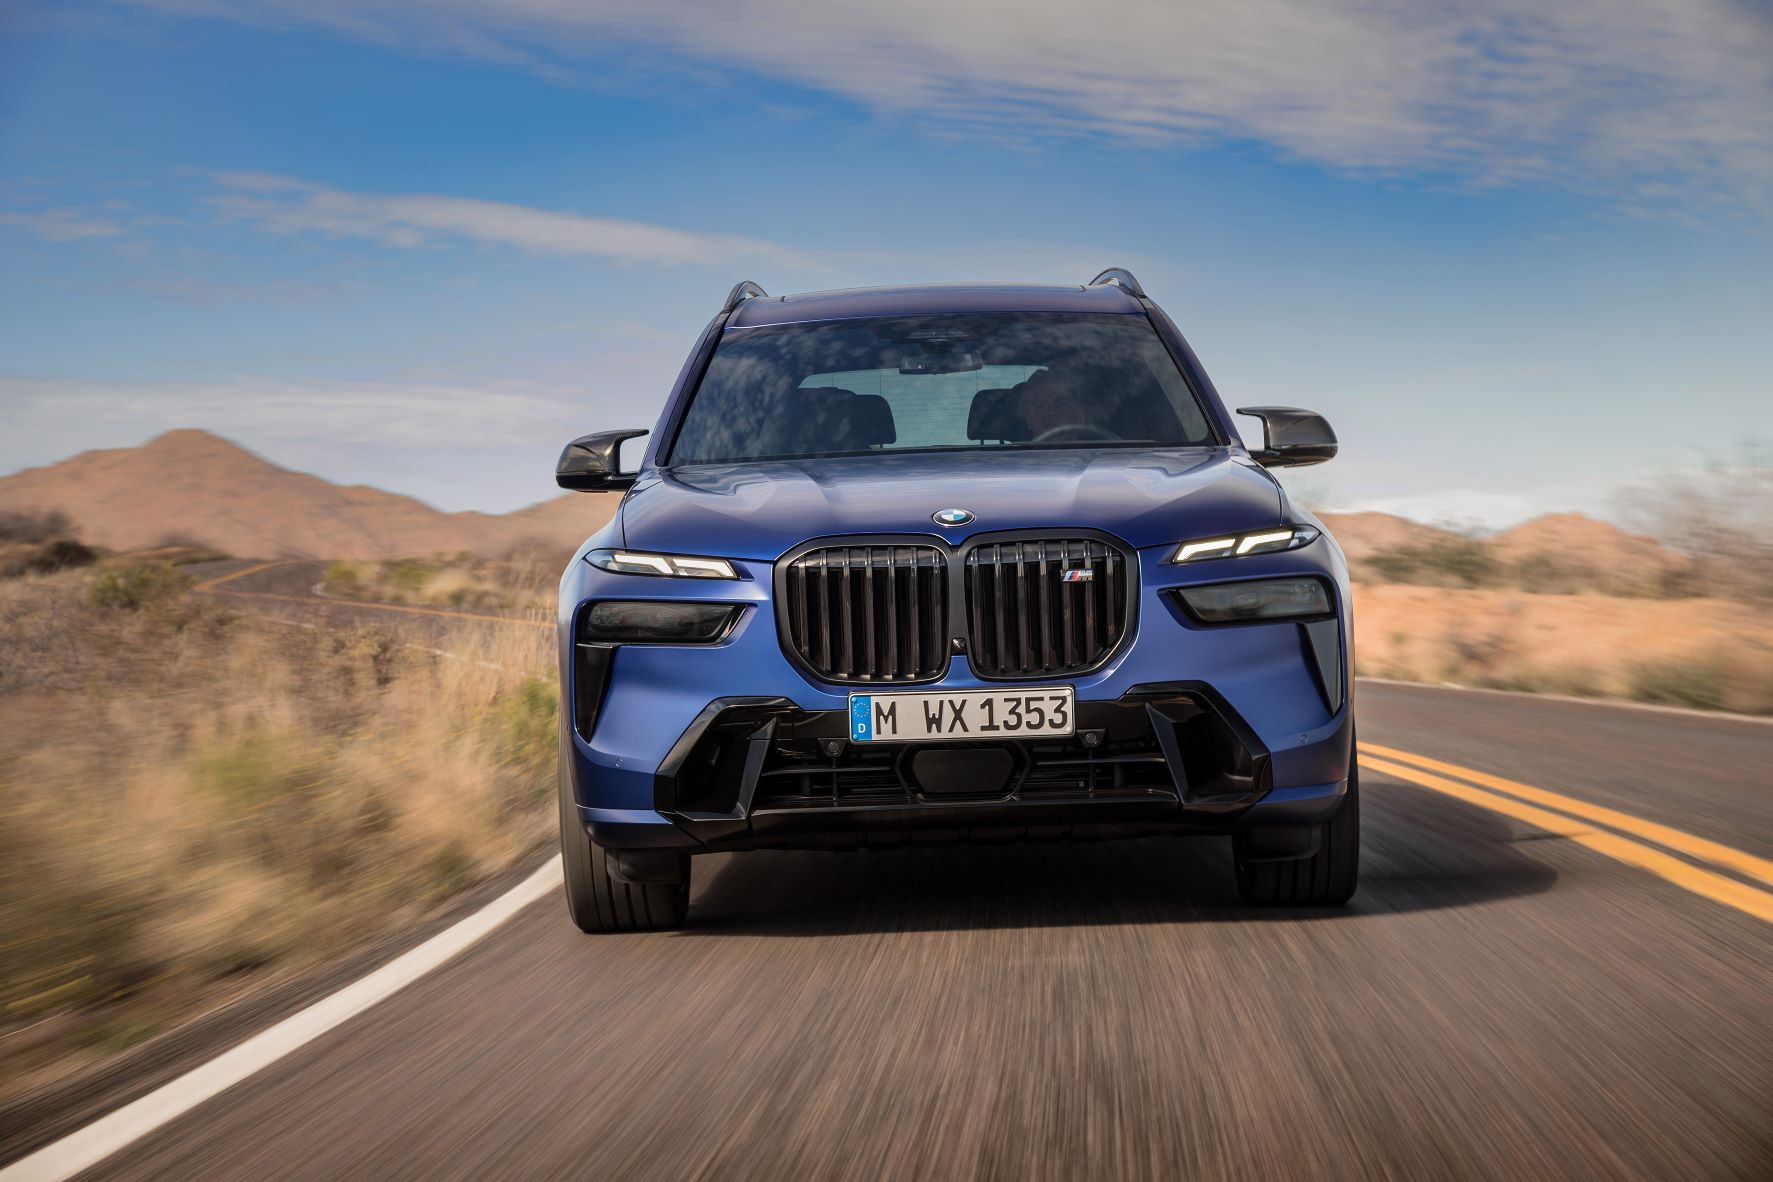 Front view of the new BMW X7